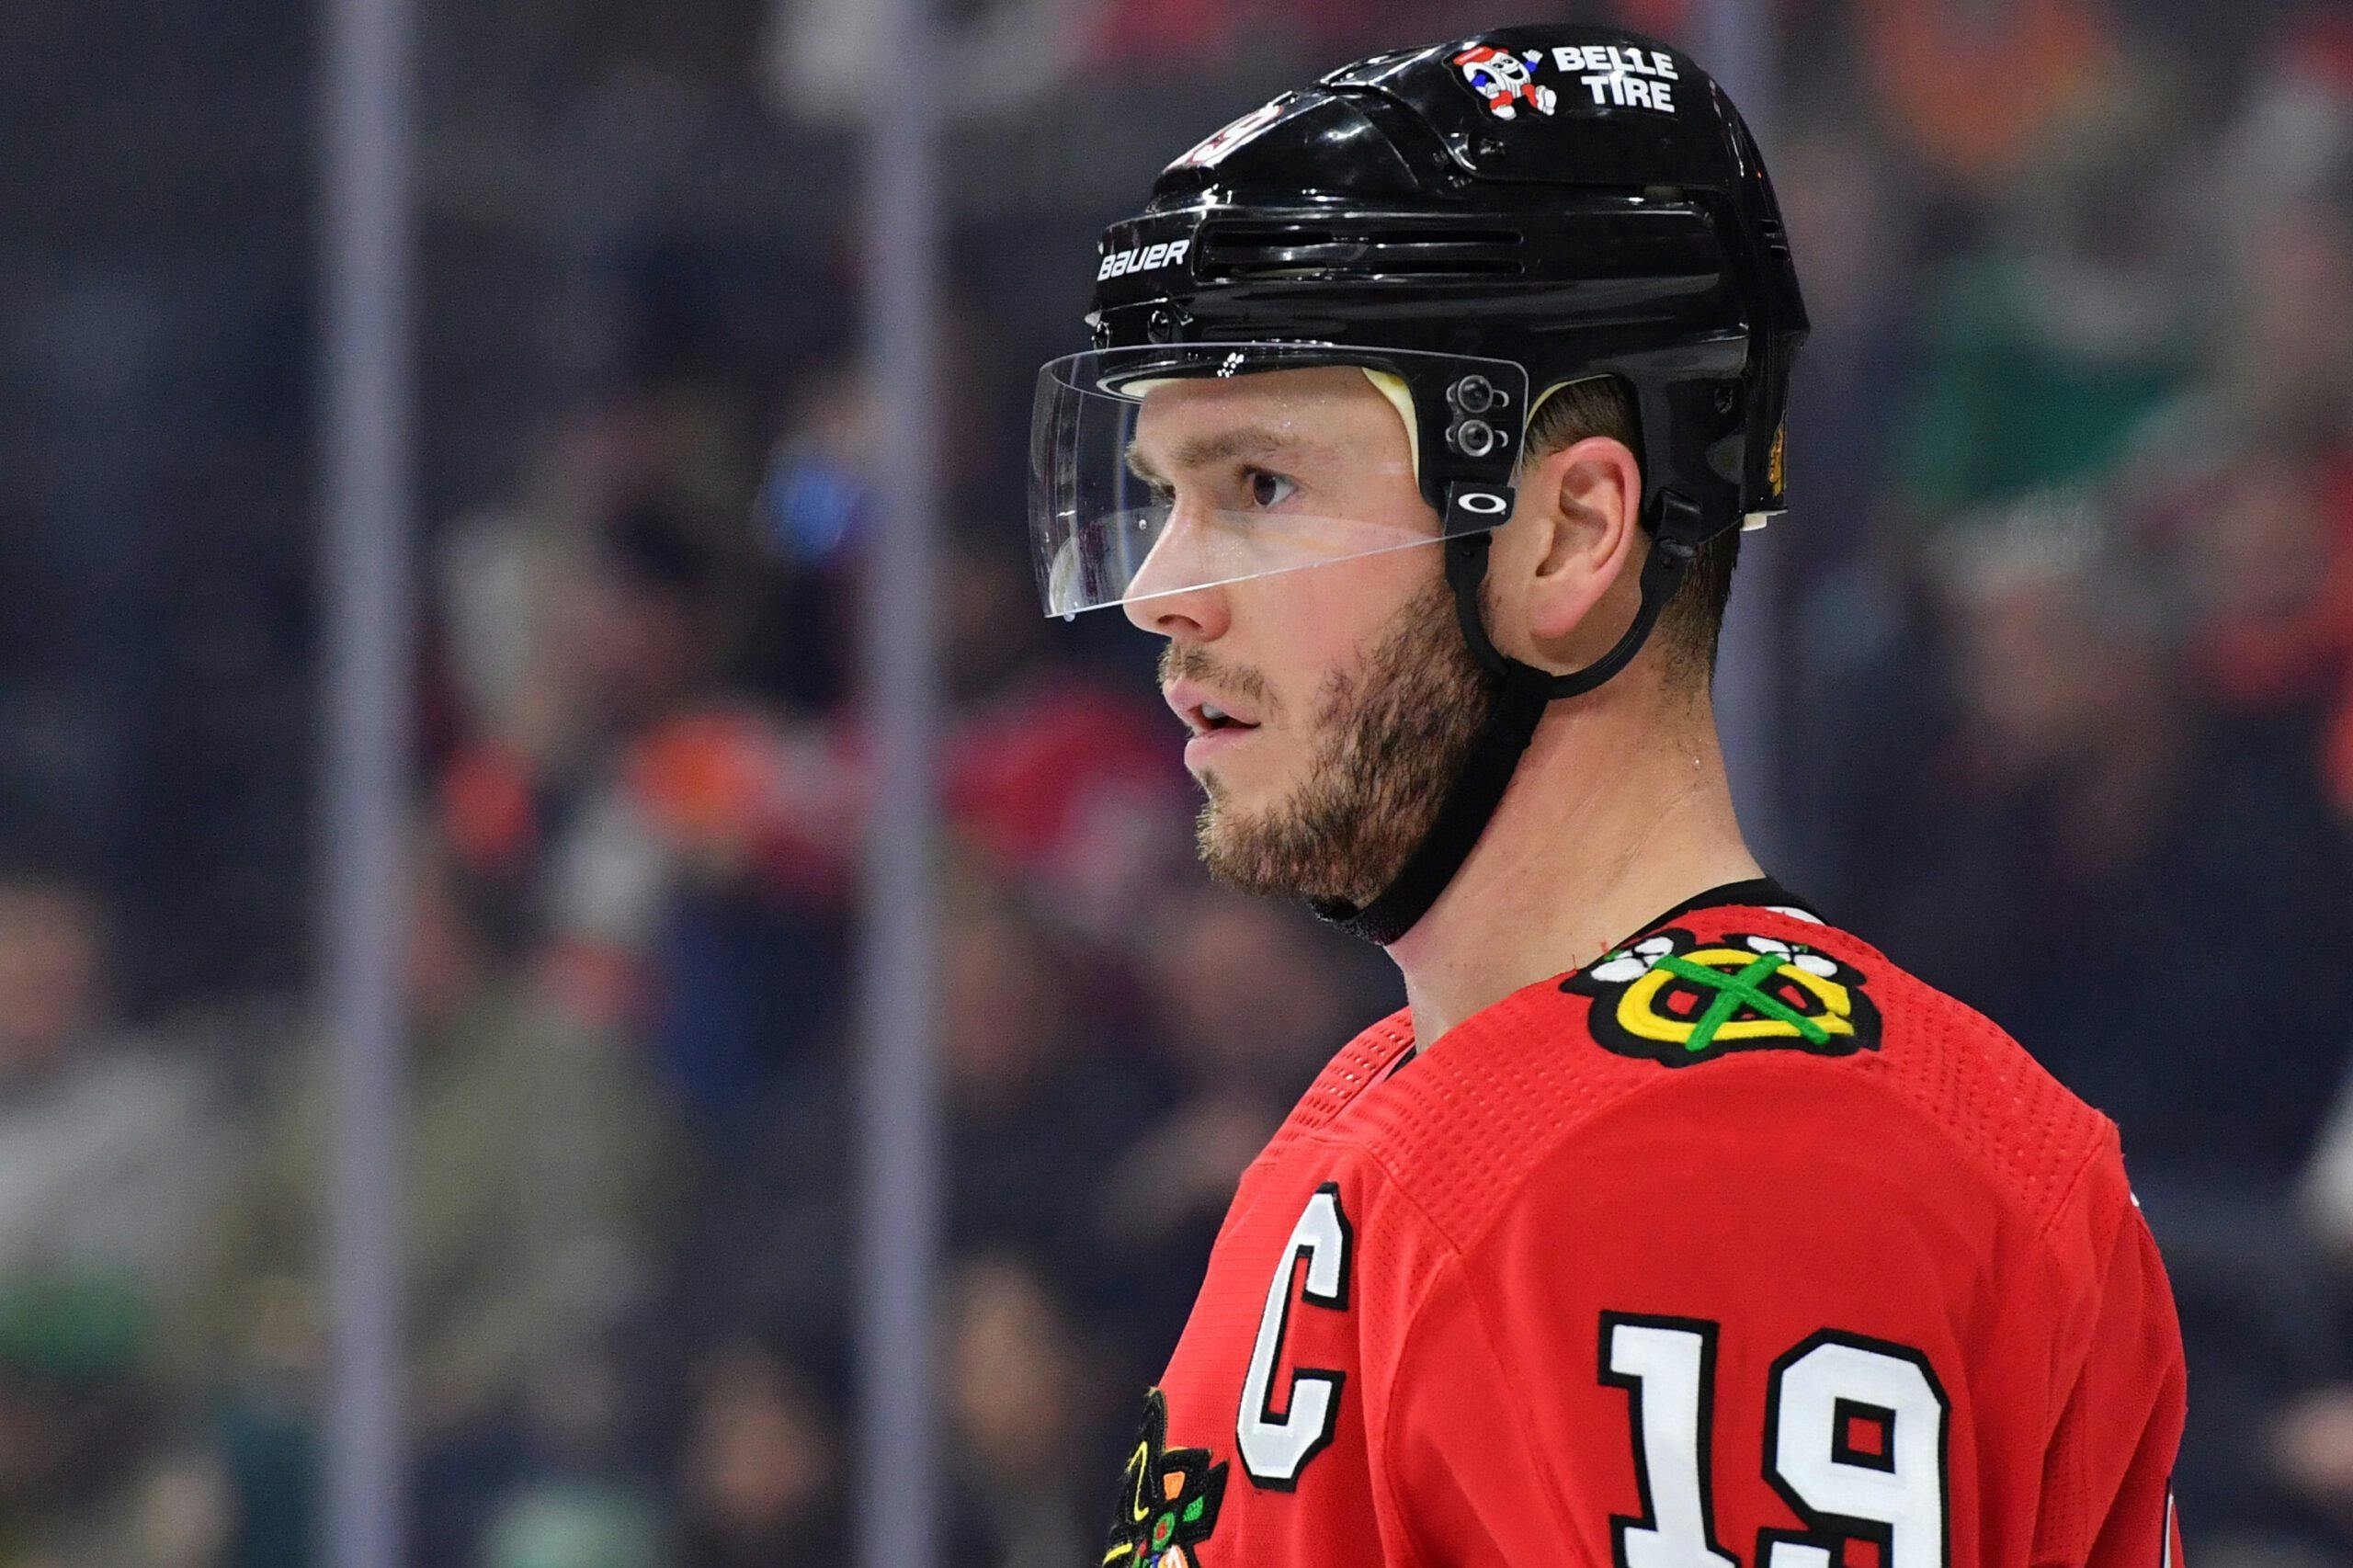 Blackhawks mishandle announcement, but fans give departing Toews a